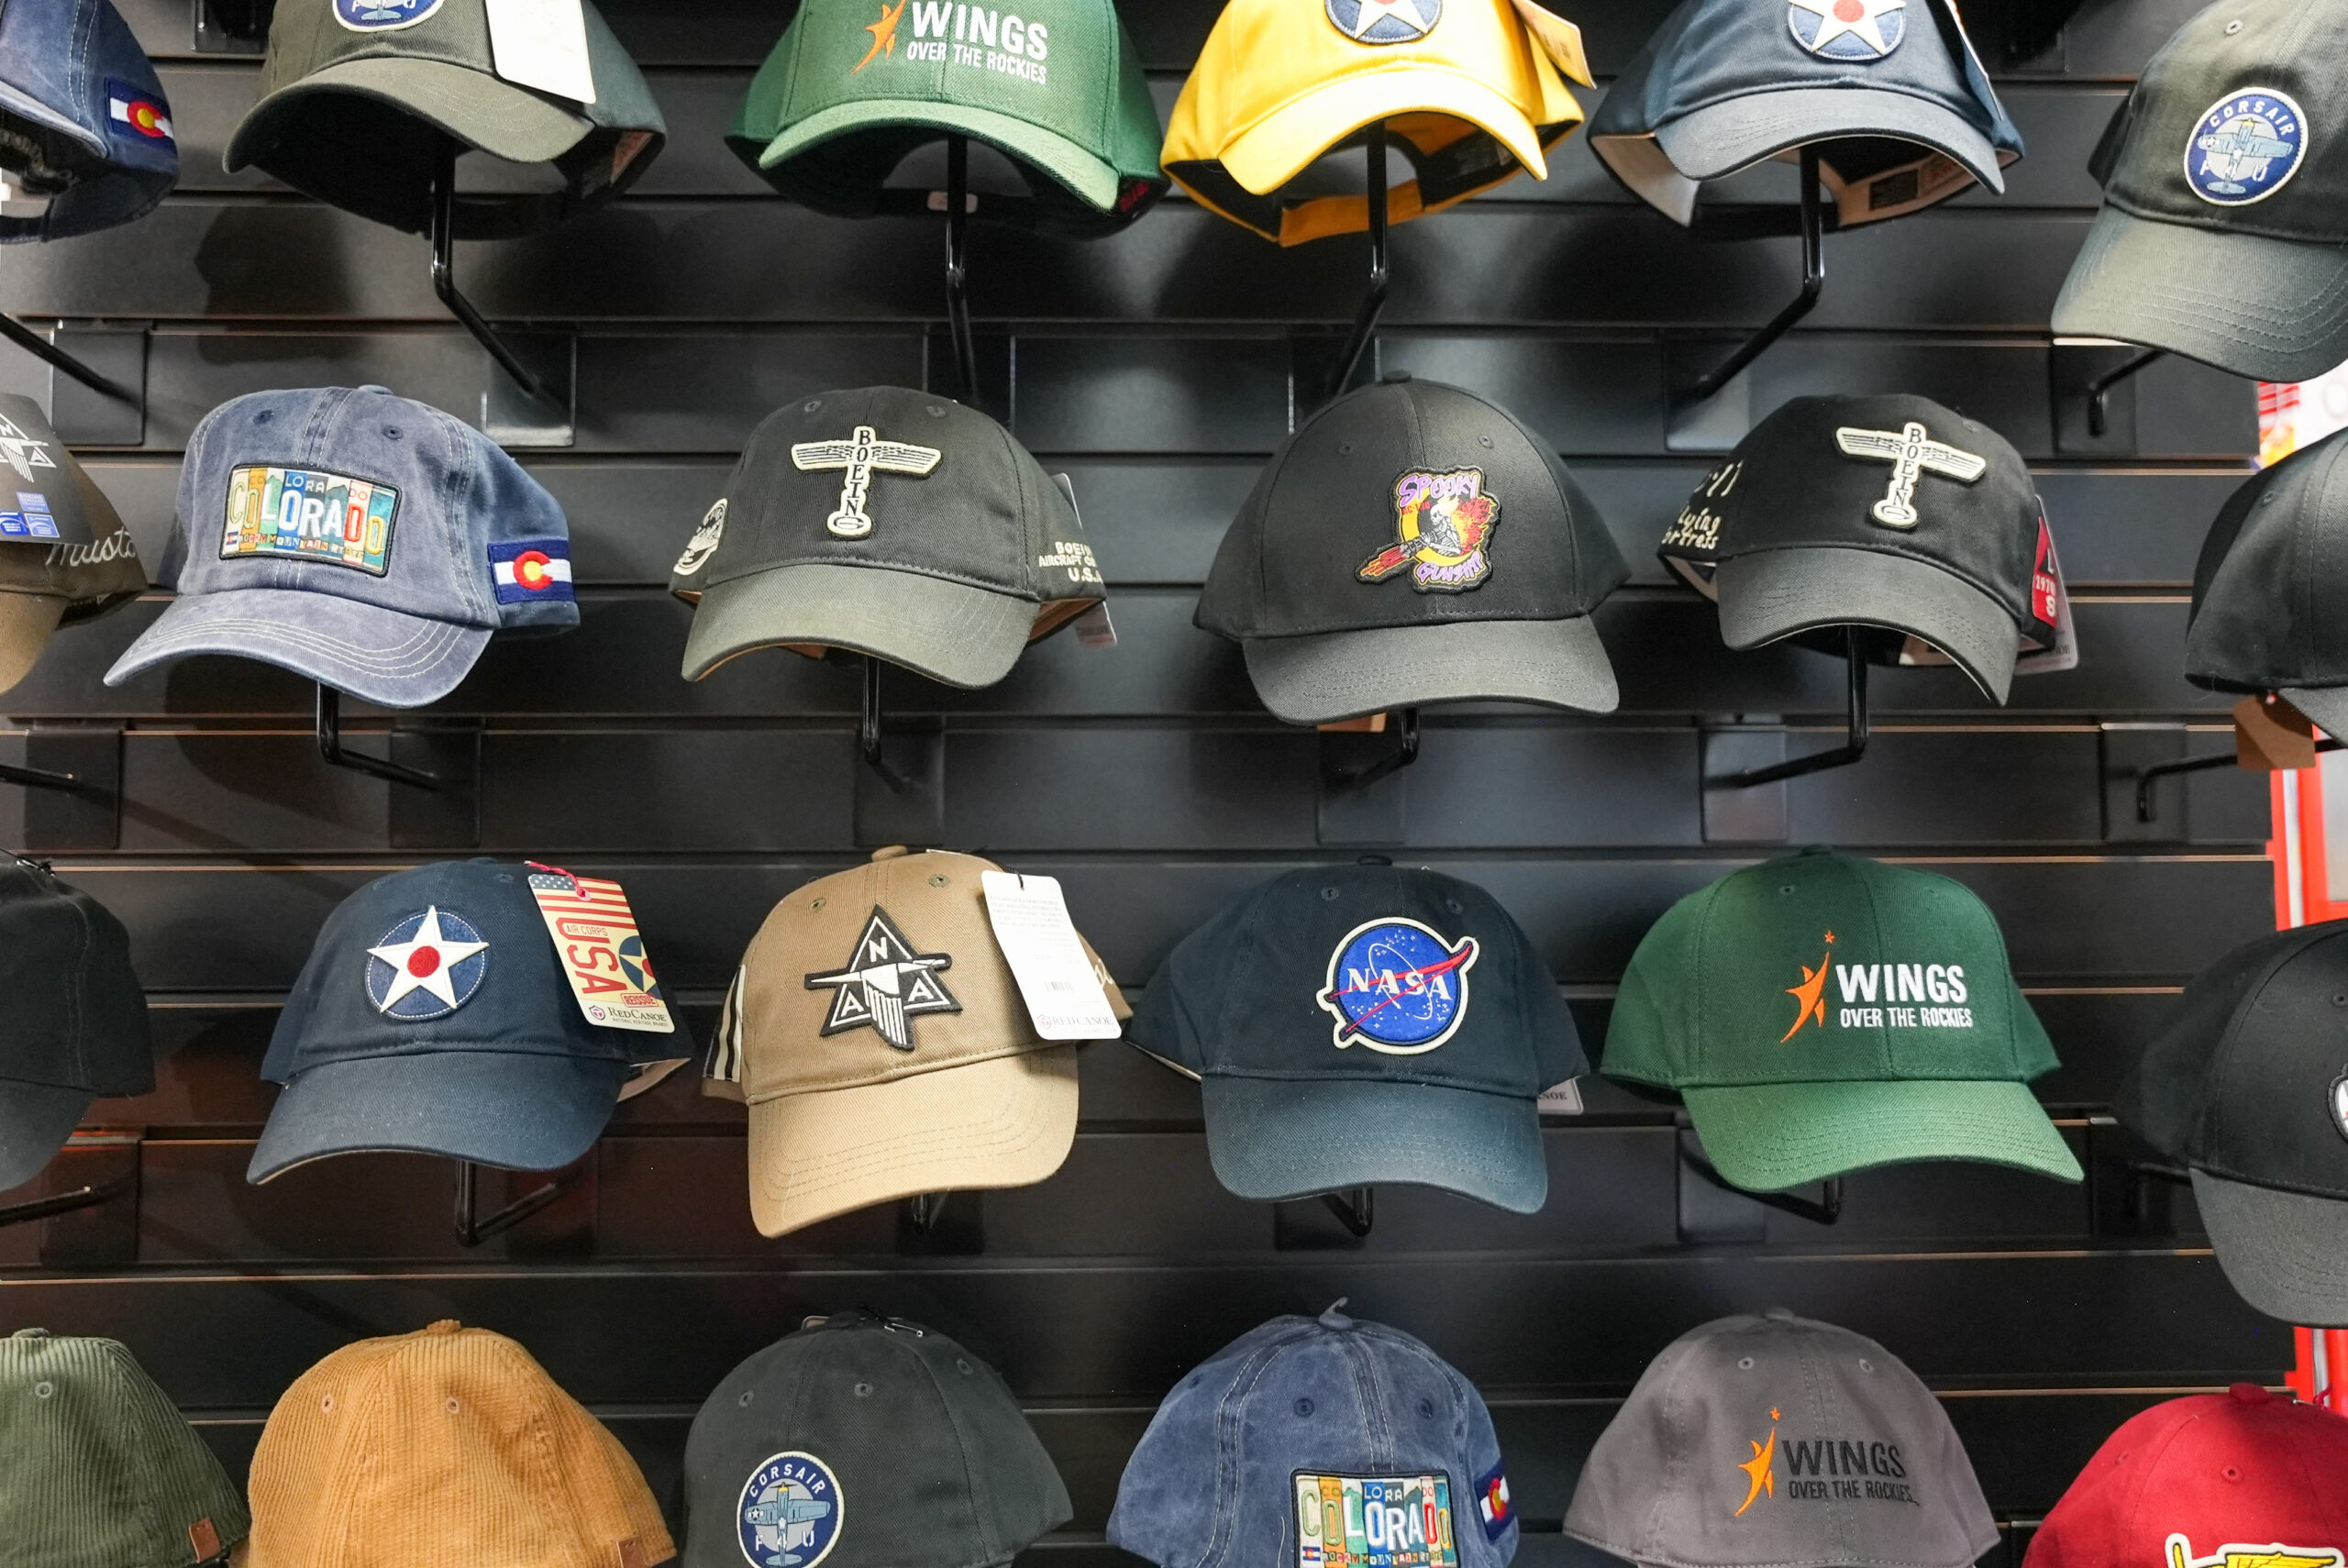 Four rows of various aviation and space related baseball caps hang on a wall.